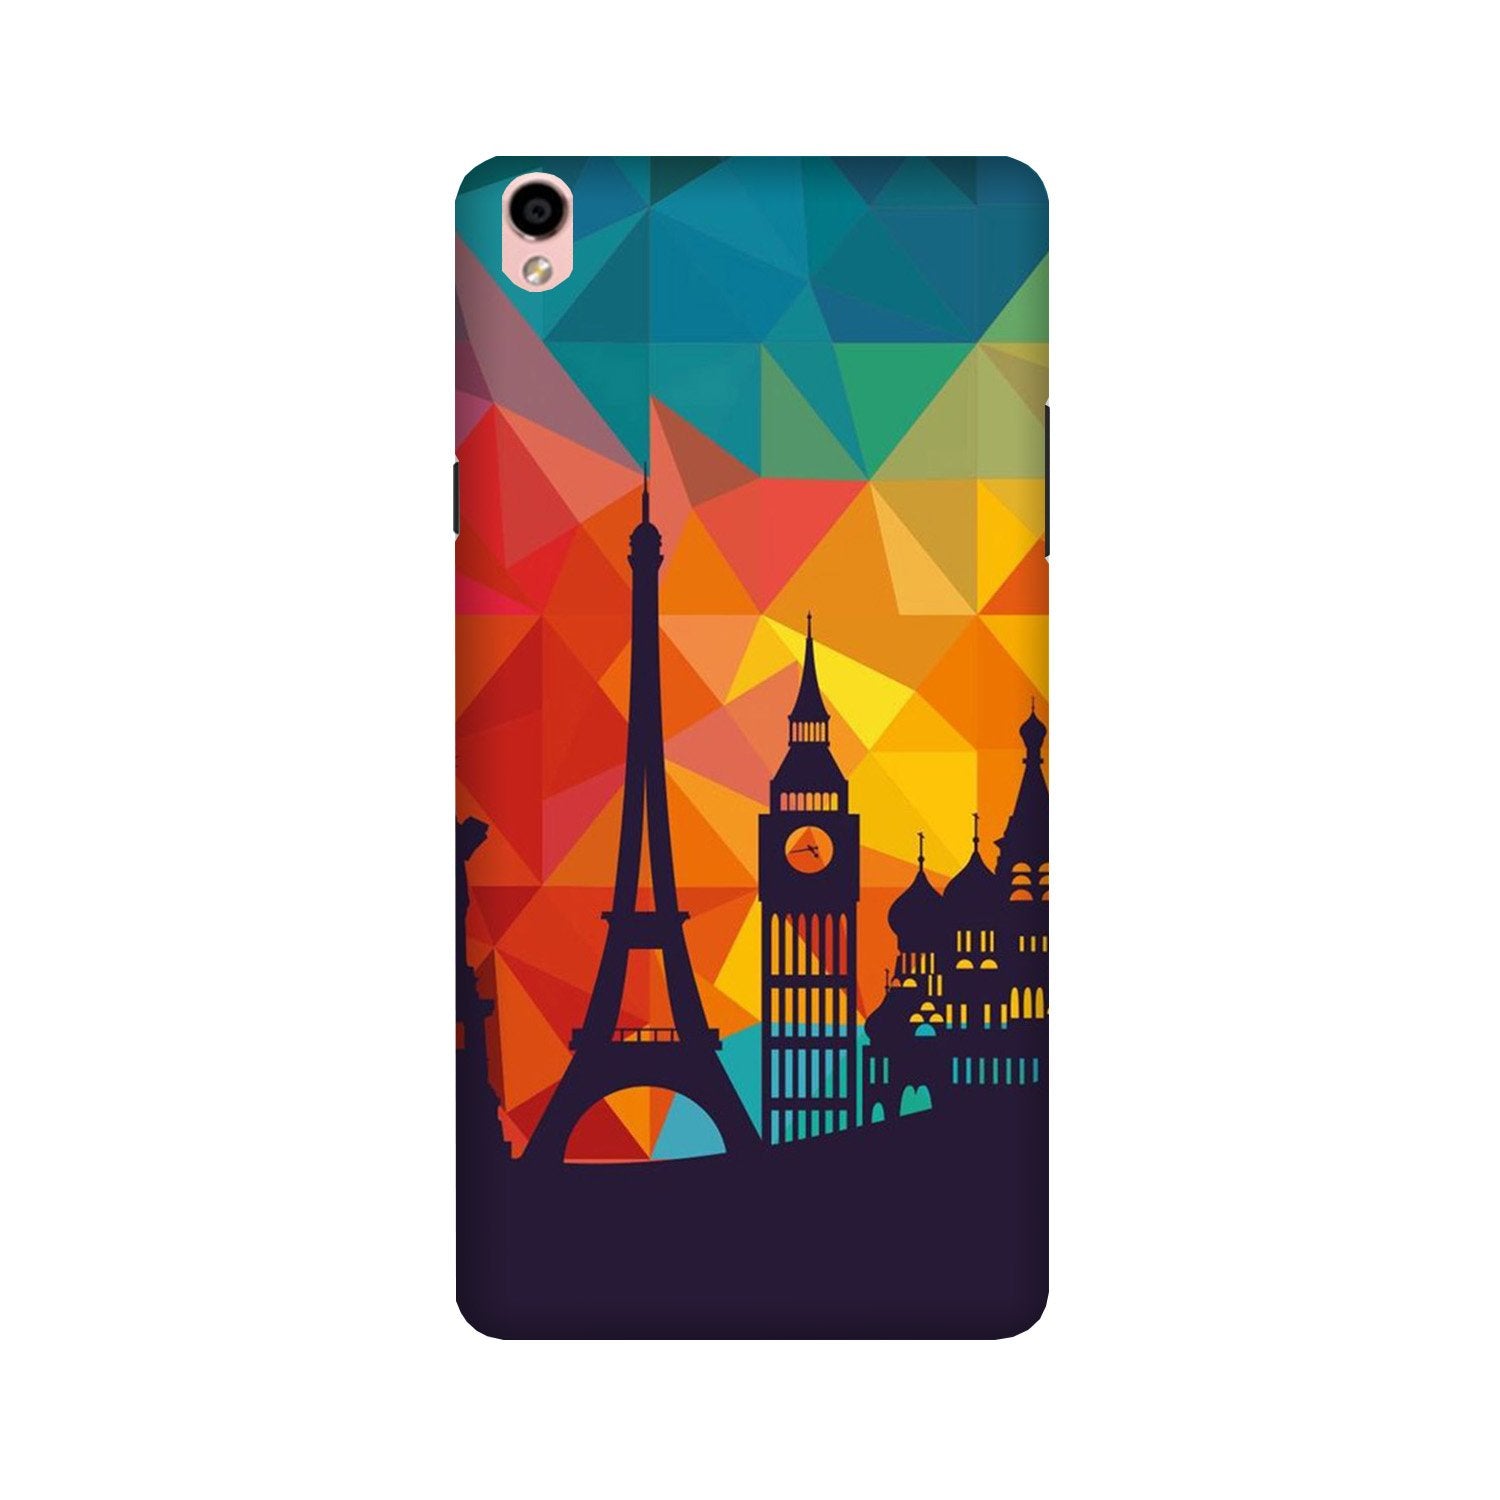 Eiffel Tower2 Case for Oppo F1 Plus